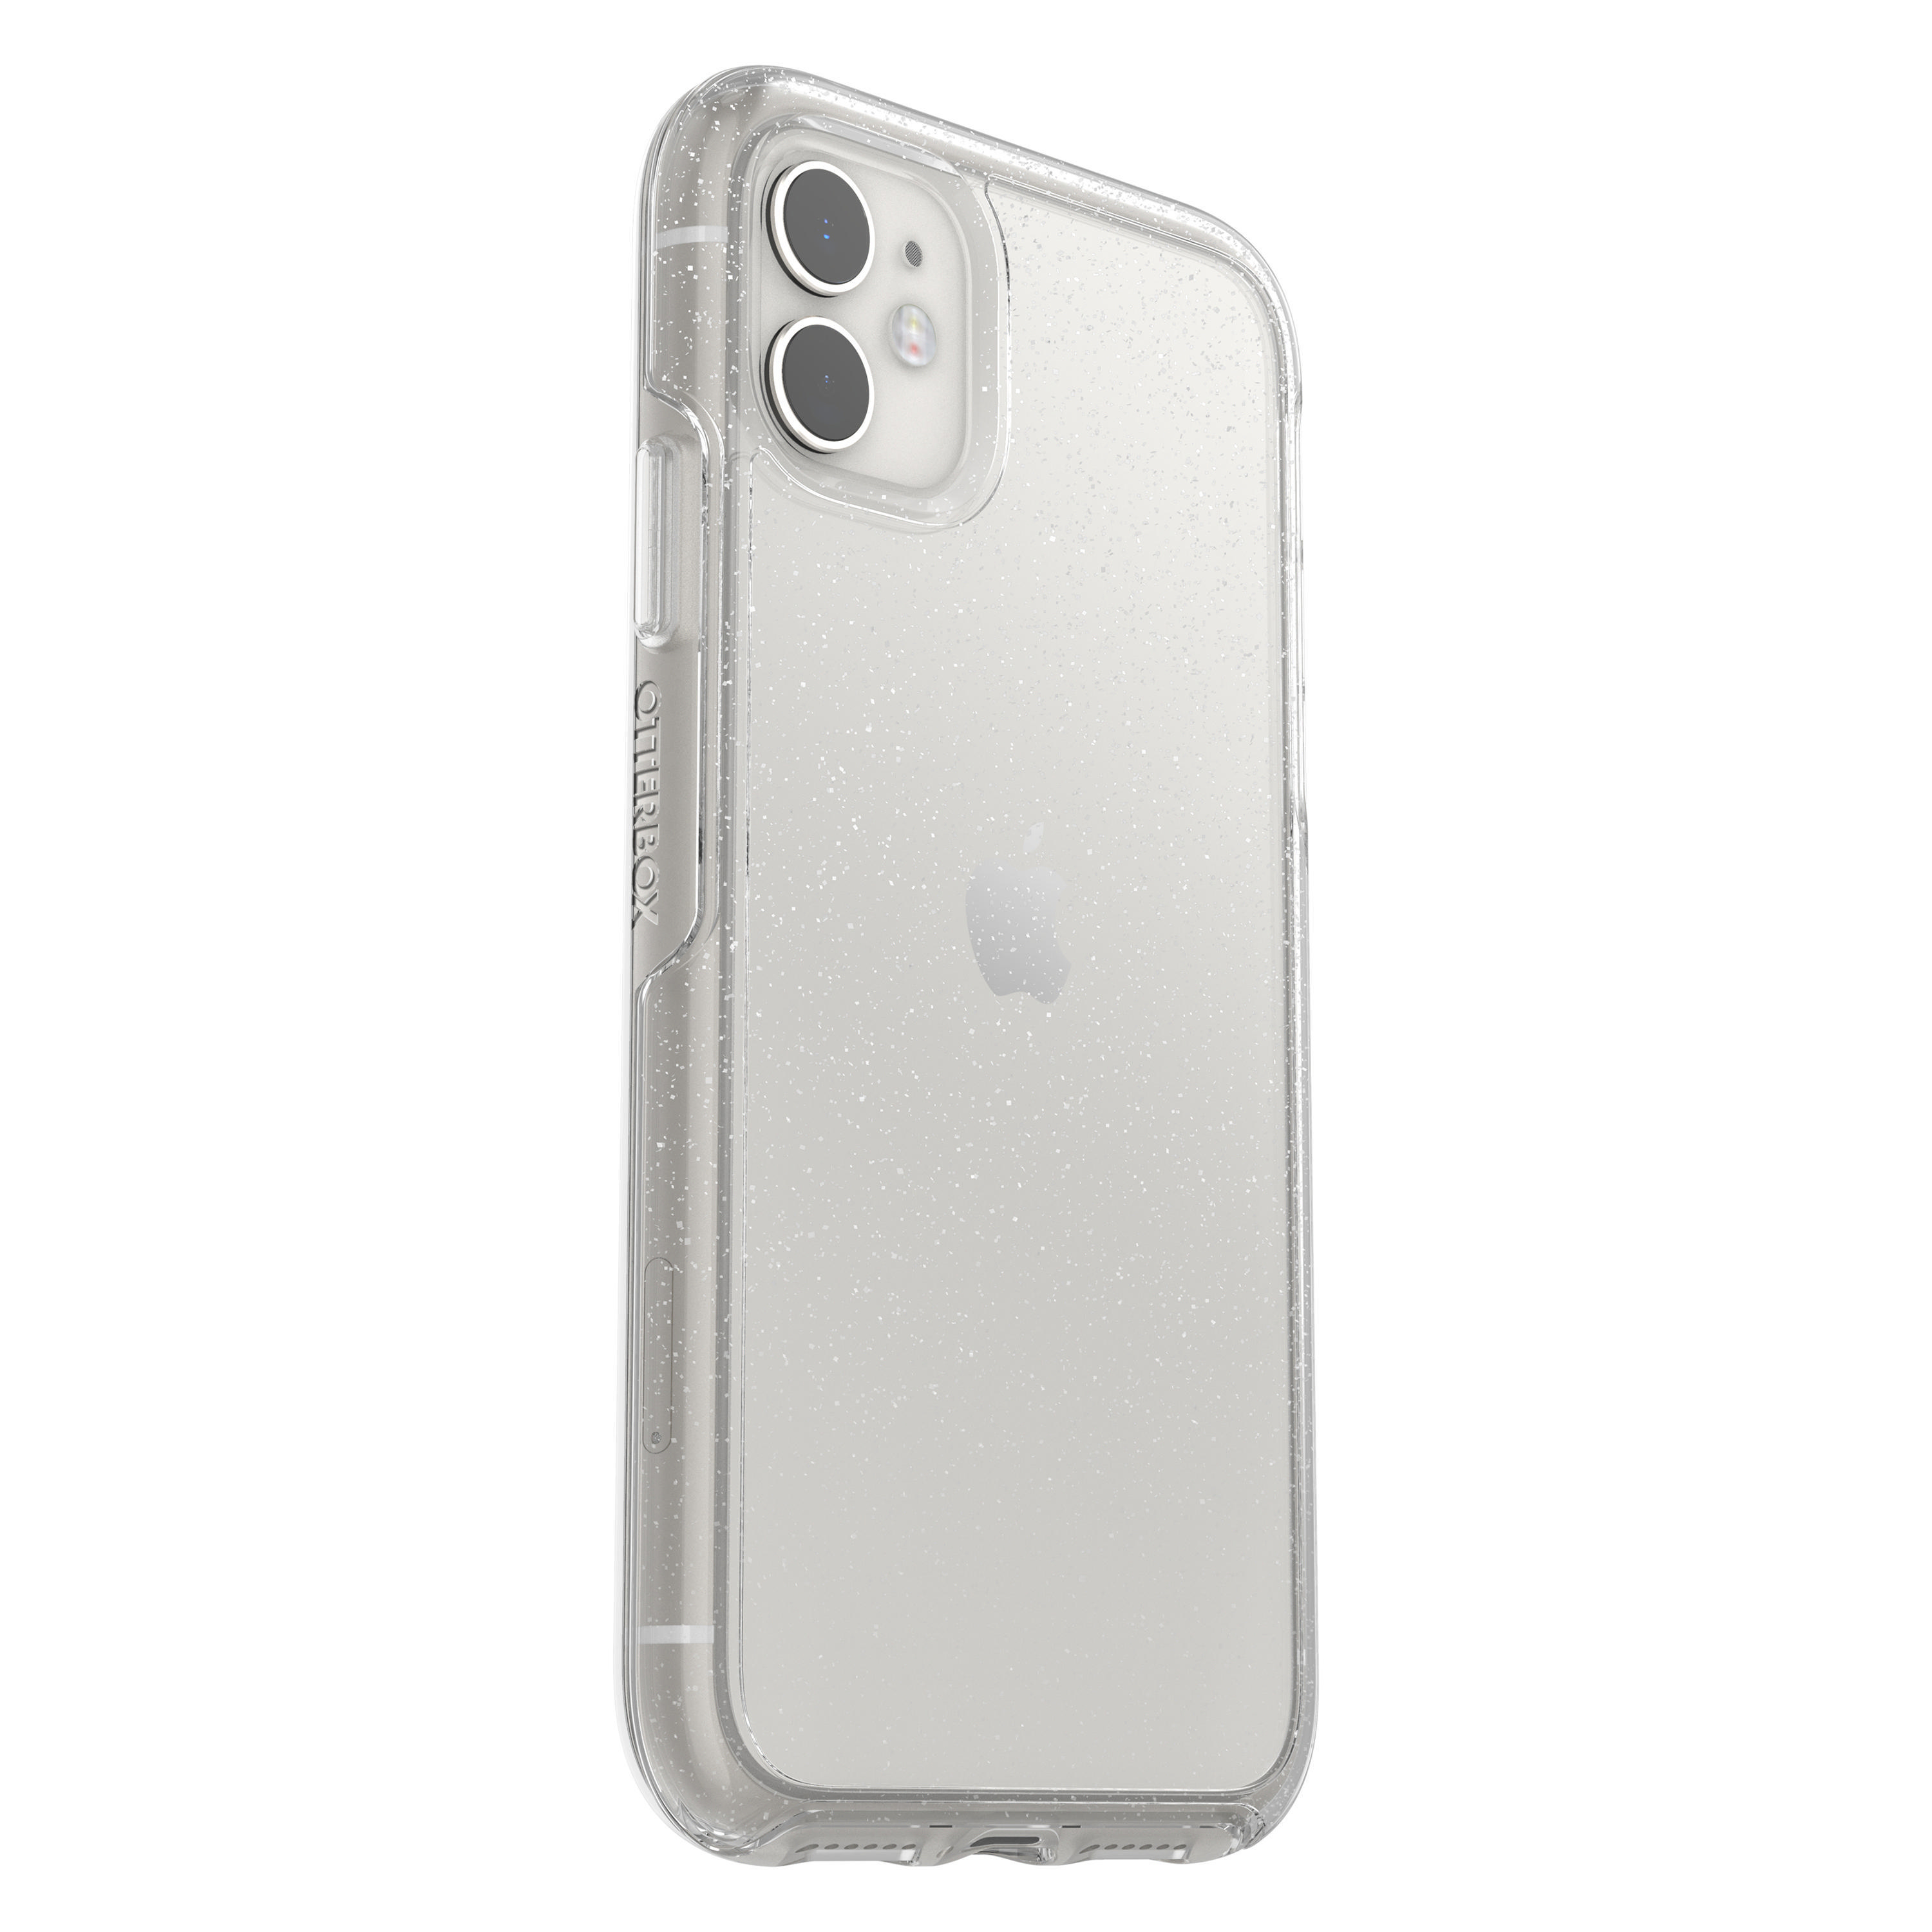 Symmetry, Apple, iPhone Backcover, OTTERBOX Transparent 11,